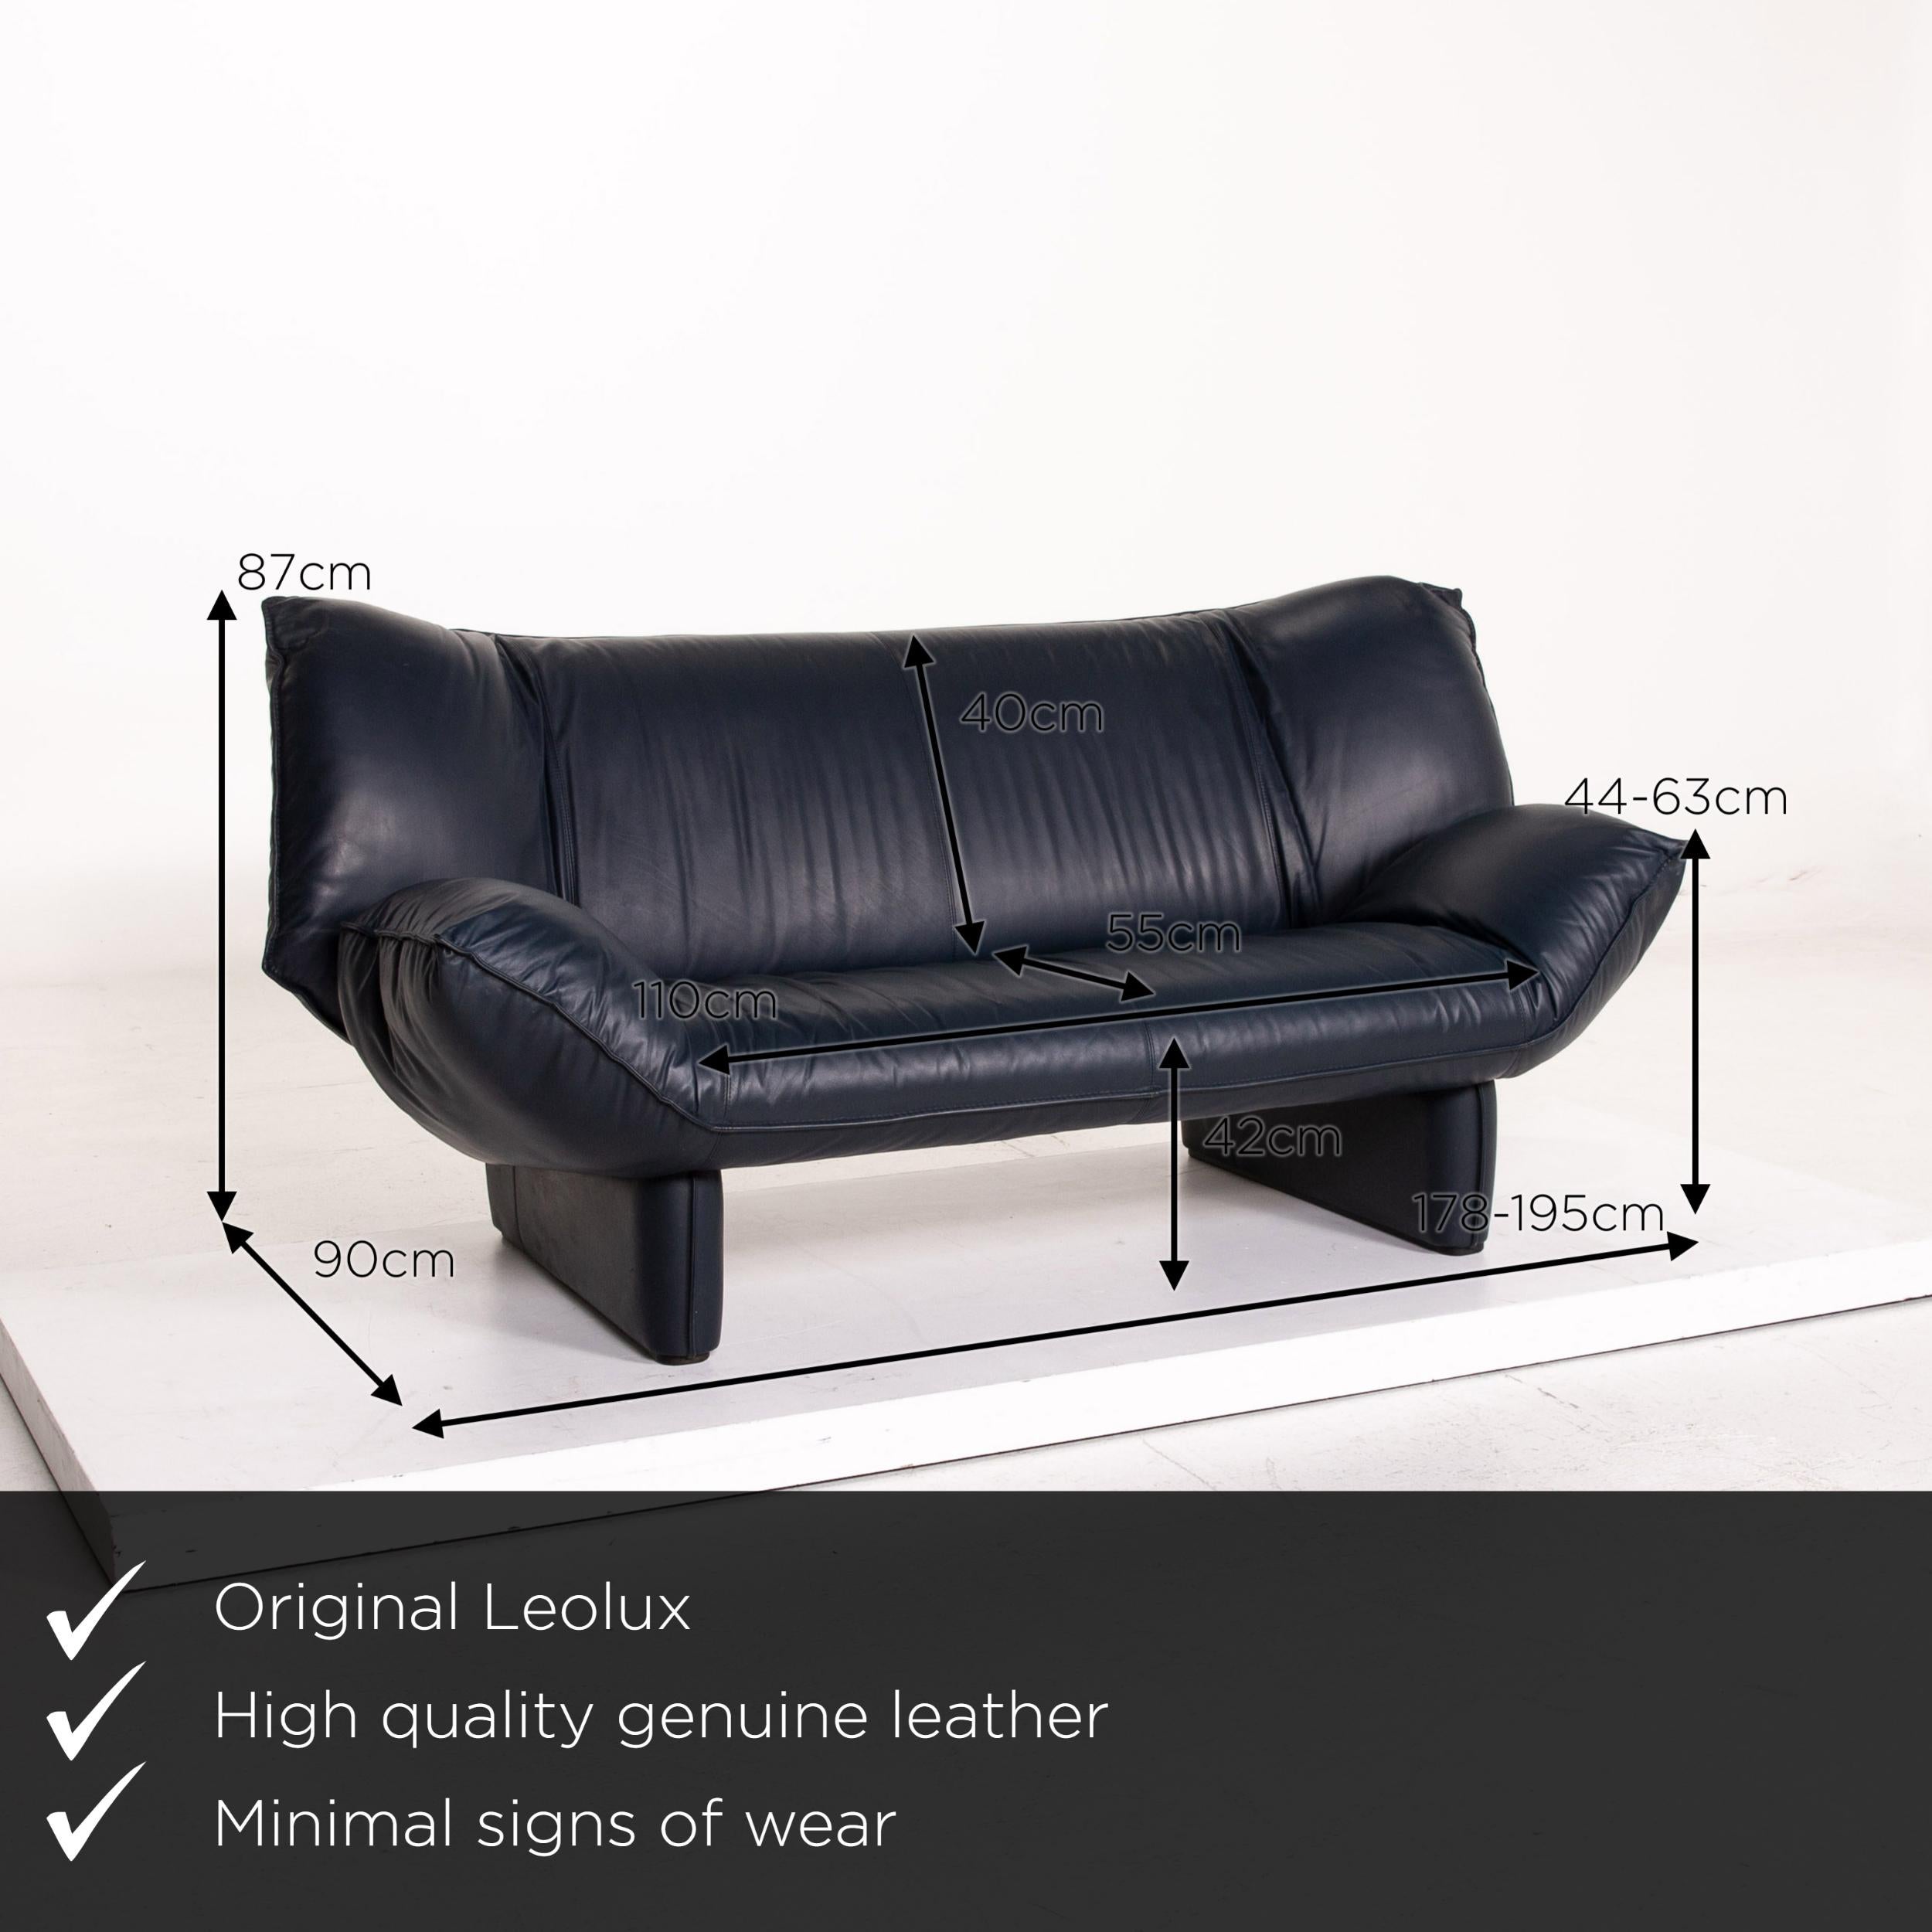 We present to you a Leolux Tango leather sofa blue dark blue two-seat function couch.
 

 Product measurements in centimeters:
 

Depth 90
Width 178
Height 87
Seat height 42
Rest height 44
Seat depth 55
Seat width 110
Back height 40.
 